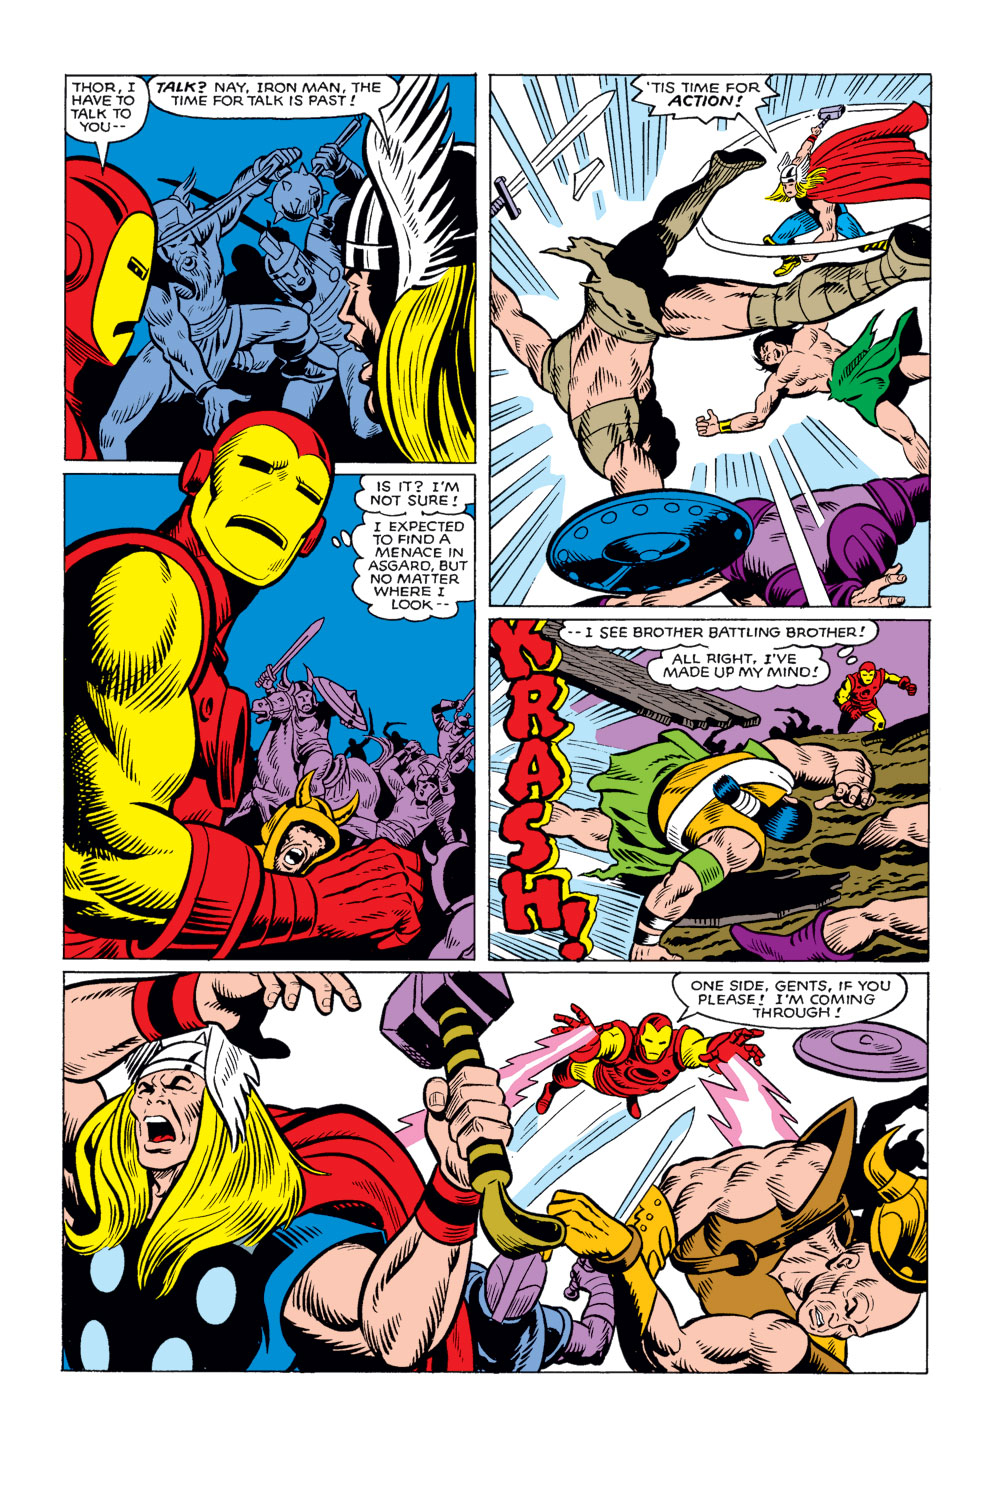 What If? (1977) issue 25 - Thor and the Avengers battled the gods - Page 20